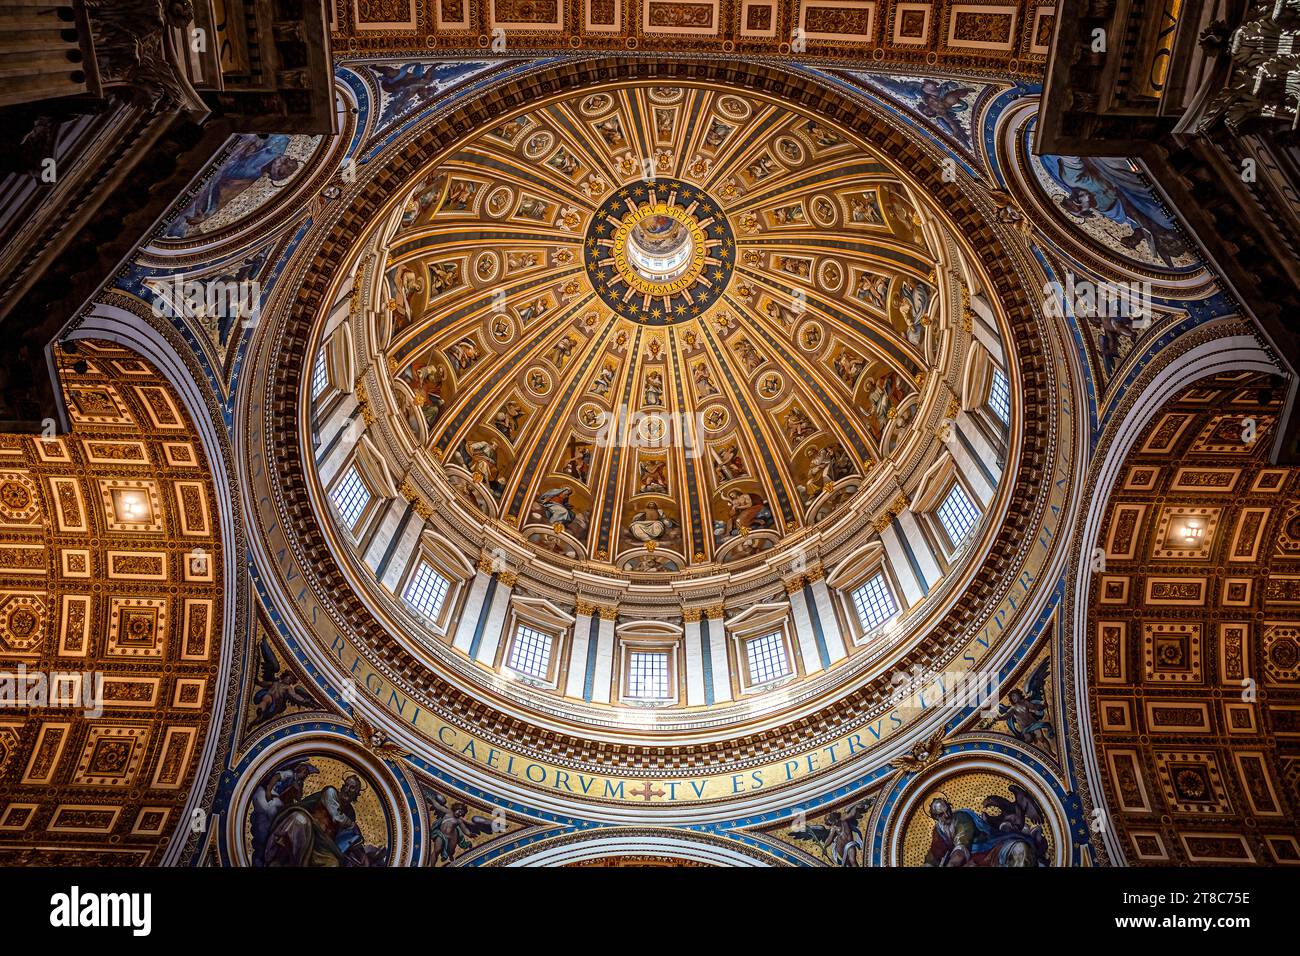 Interior images from the Vatican Basilica in Rome Italy Stock Photo